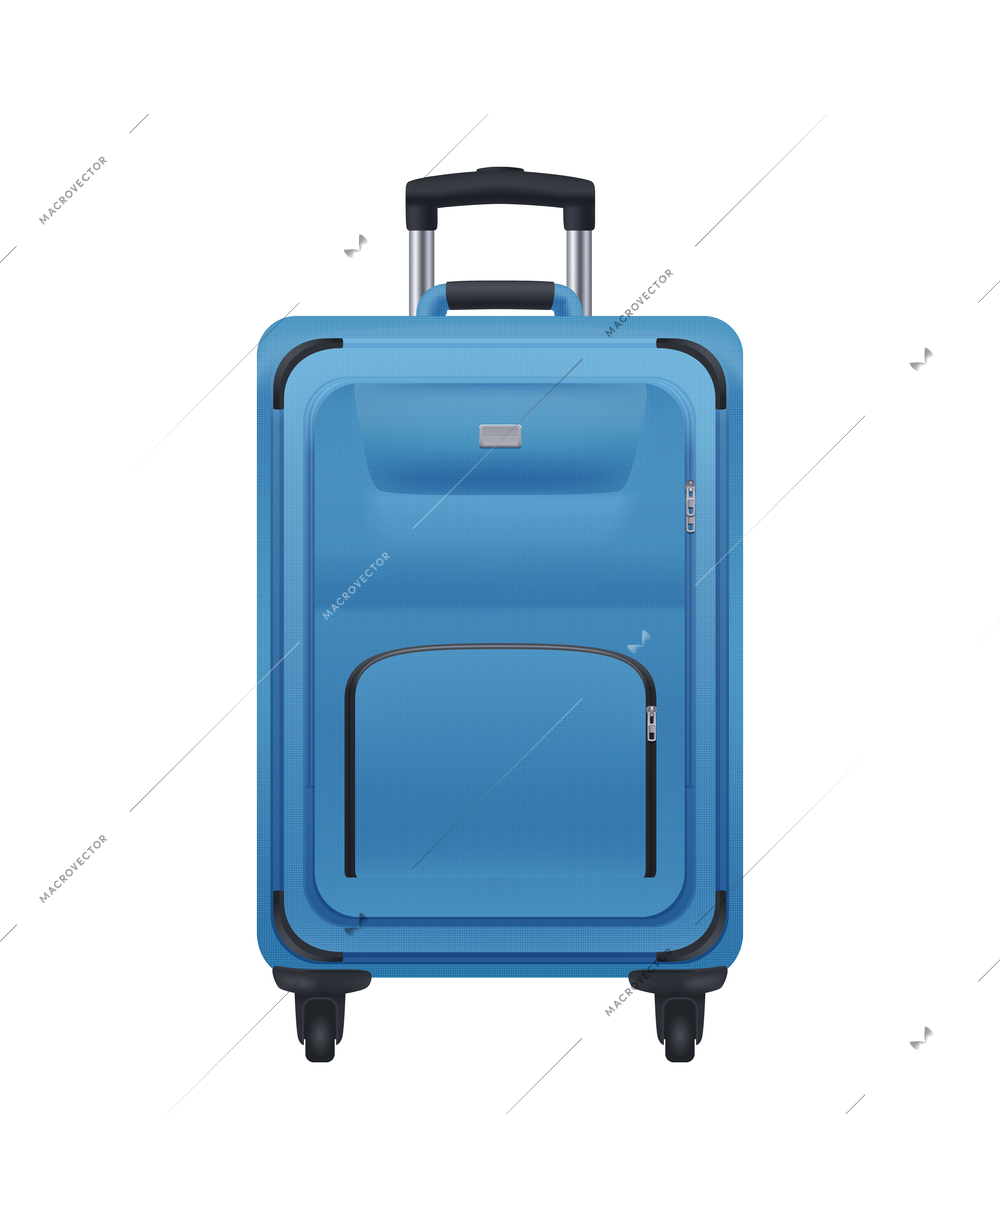 Baggage suitcase realistic composition with isolated front view image of travel bag on blank background vector illustration